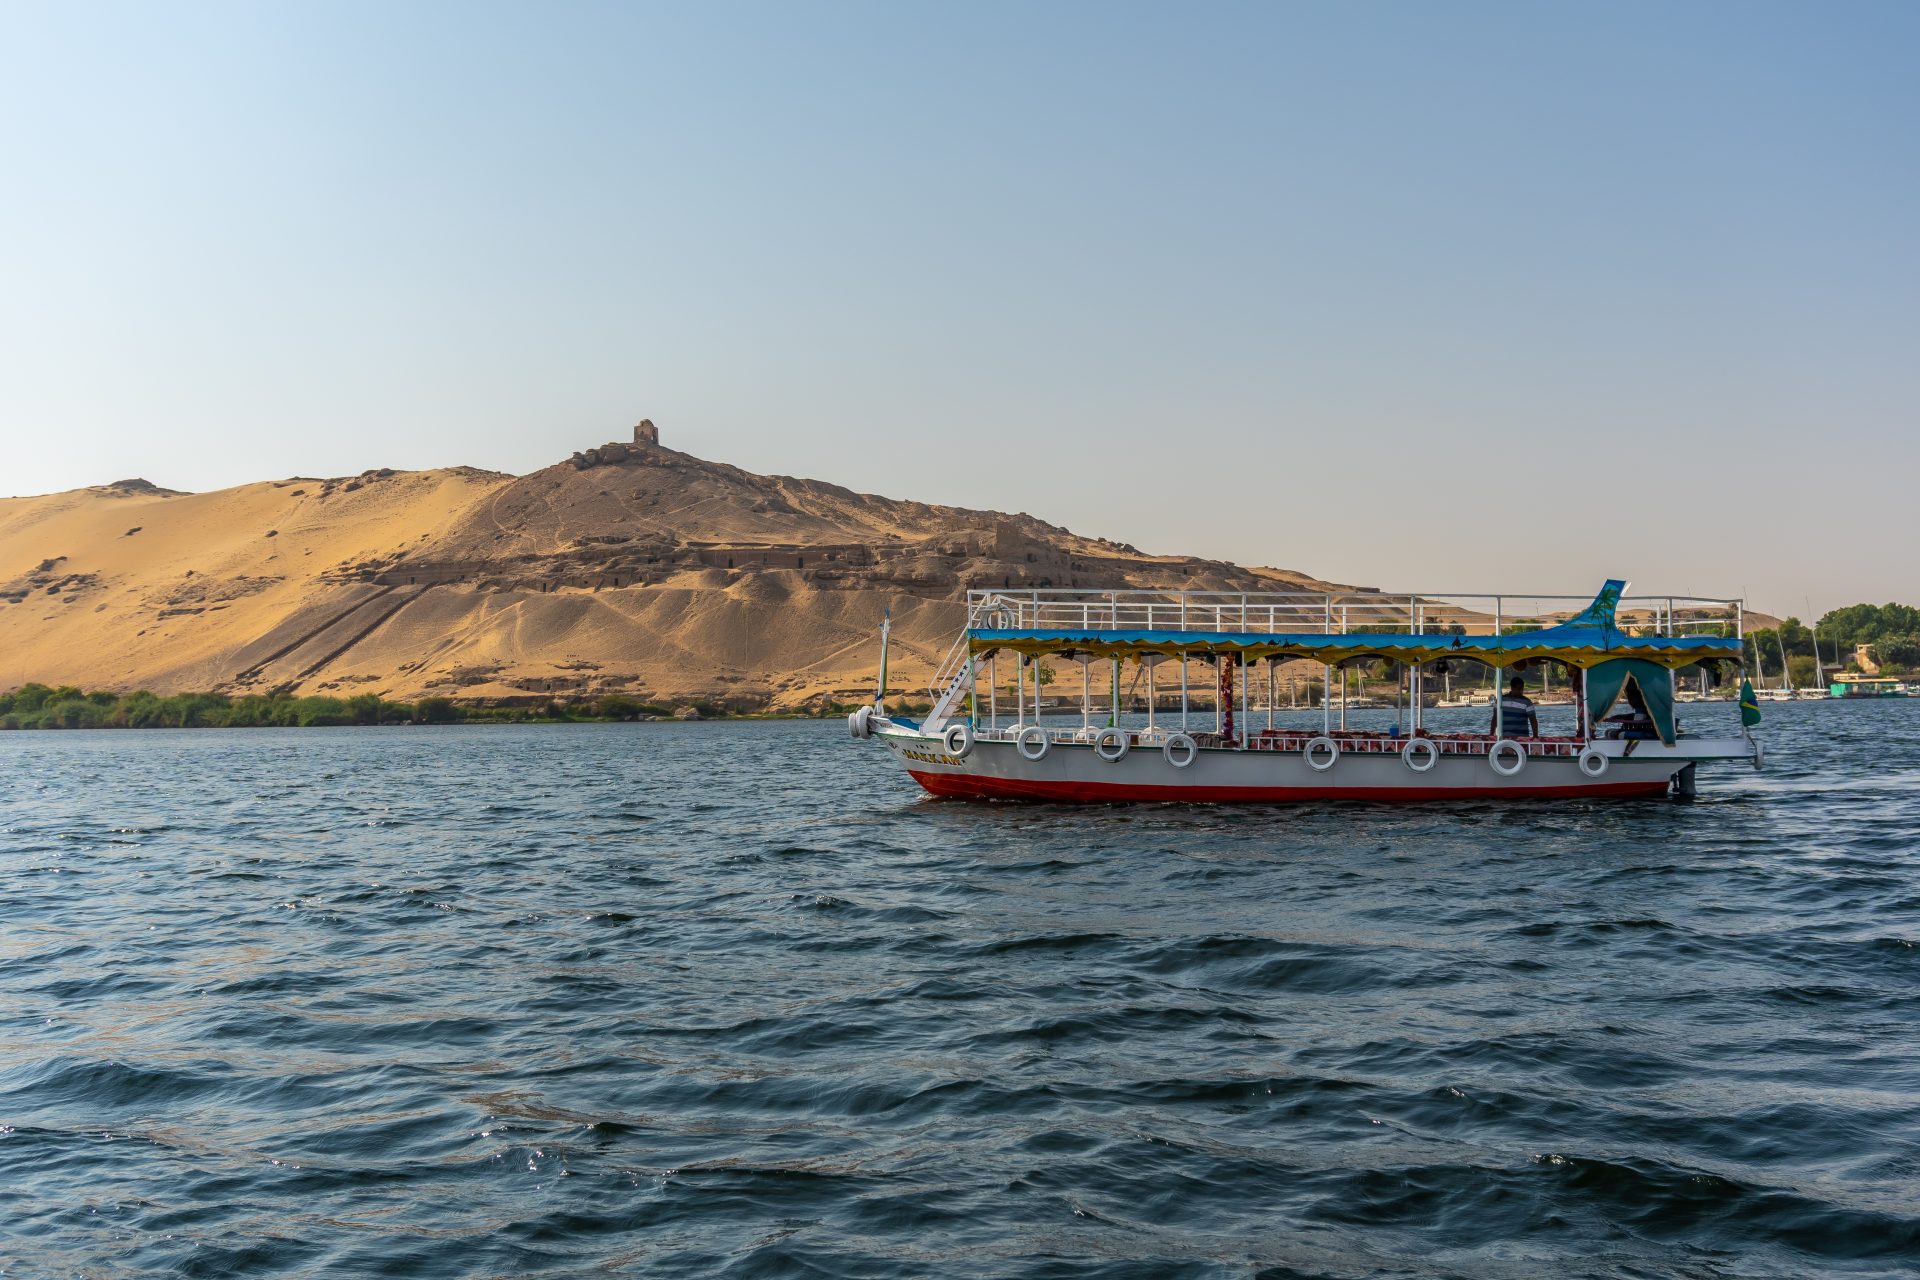 Boat navigating on the Nile river with a sand dune in the background